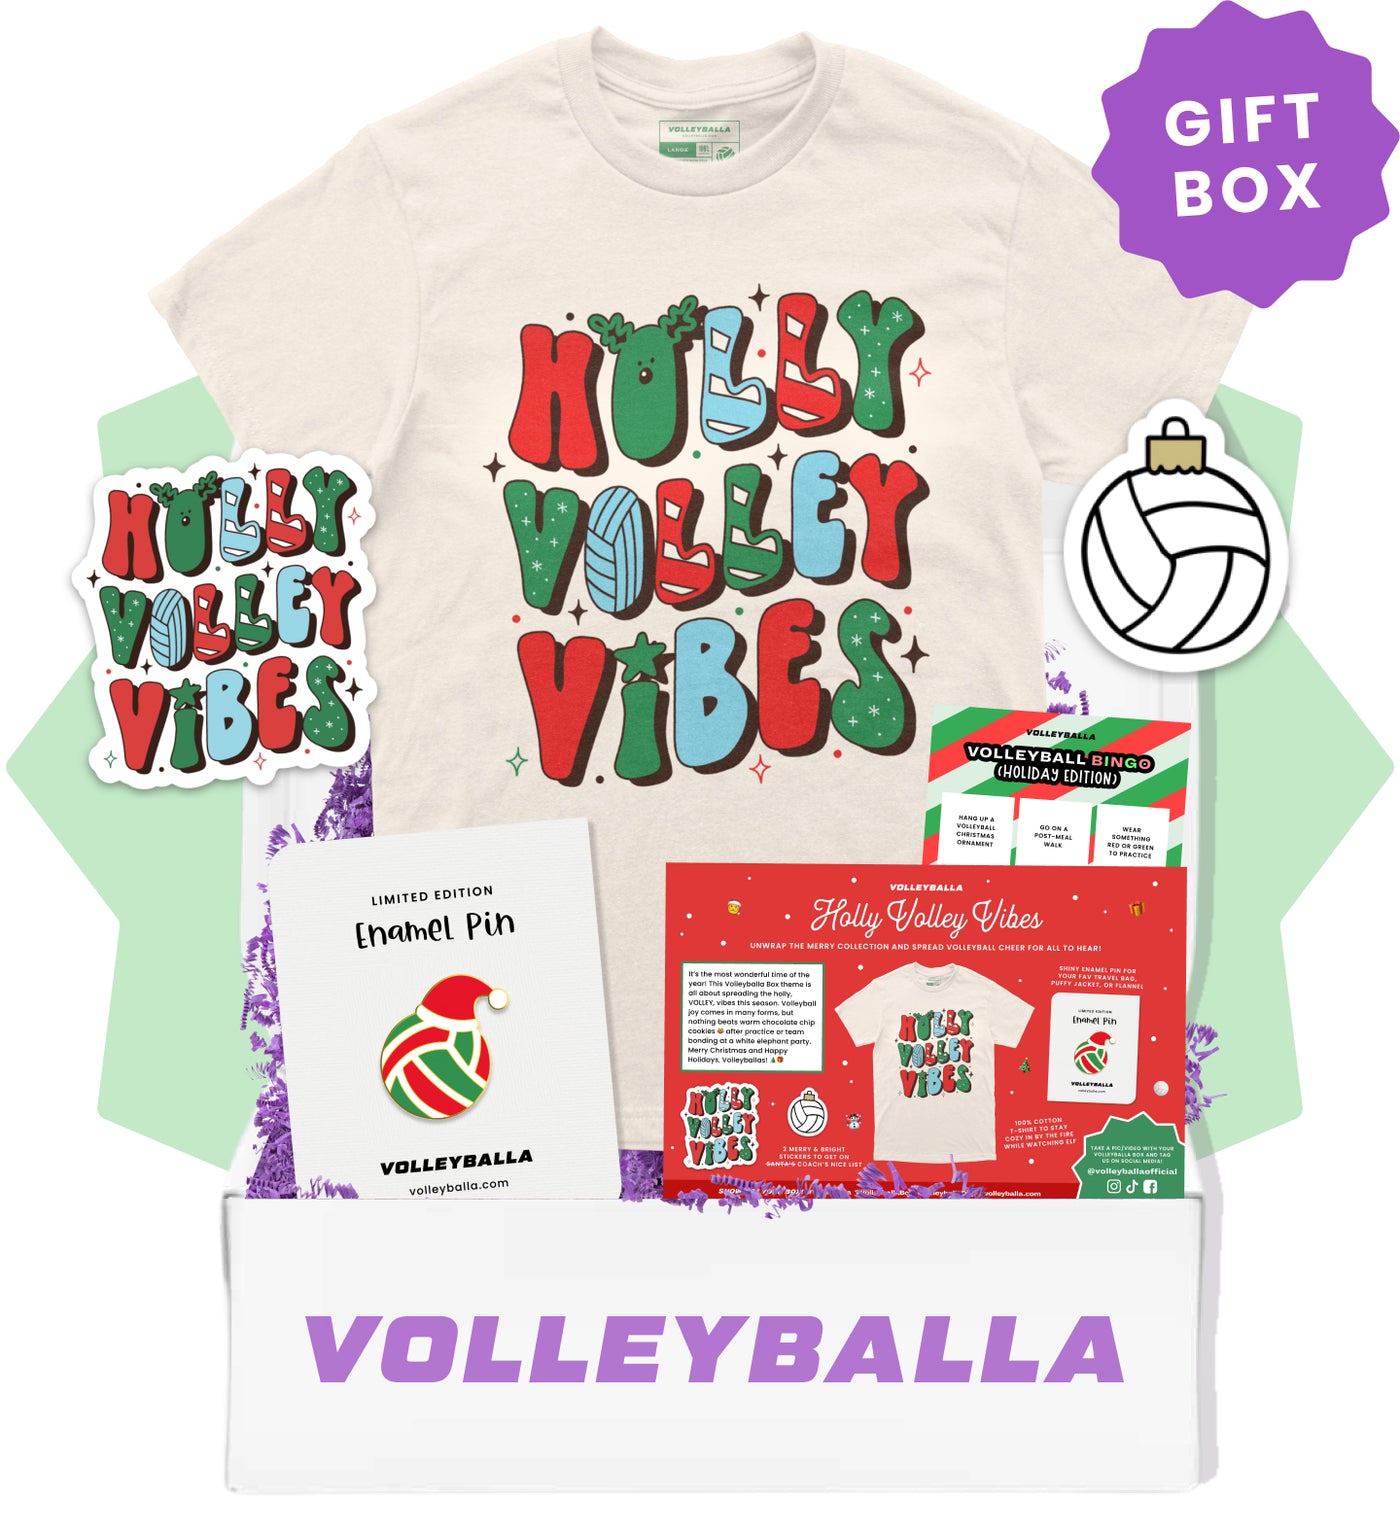 Holly, Volley Vibes - Volleyball Christmas Gift Box